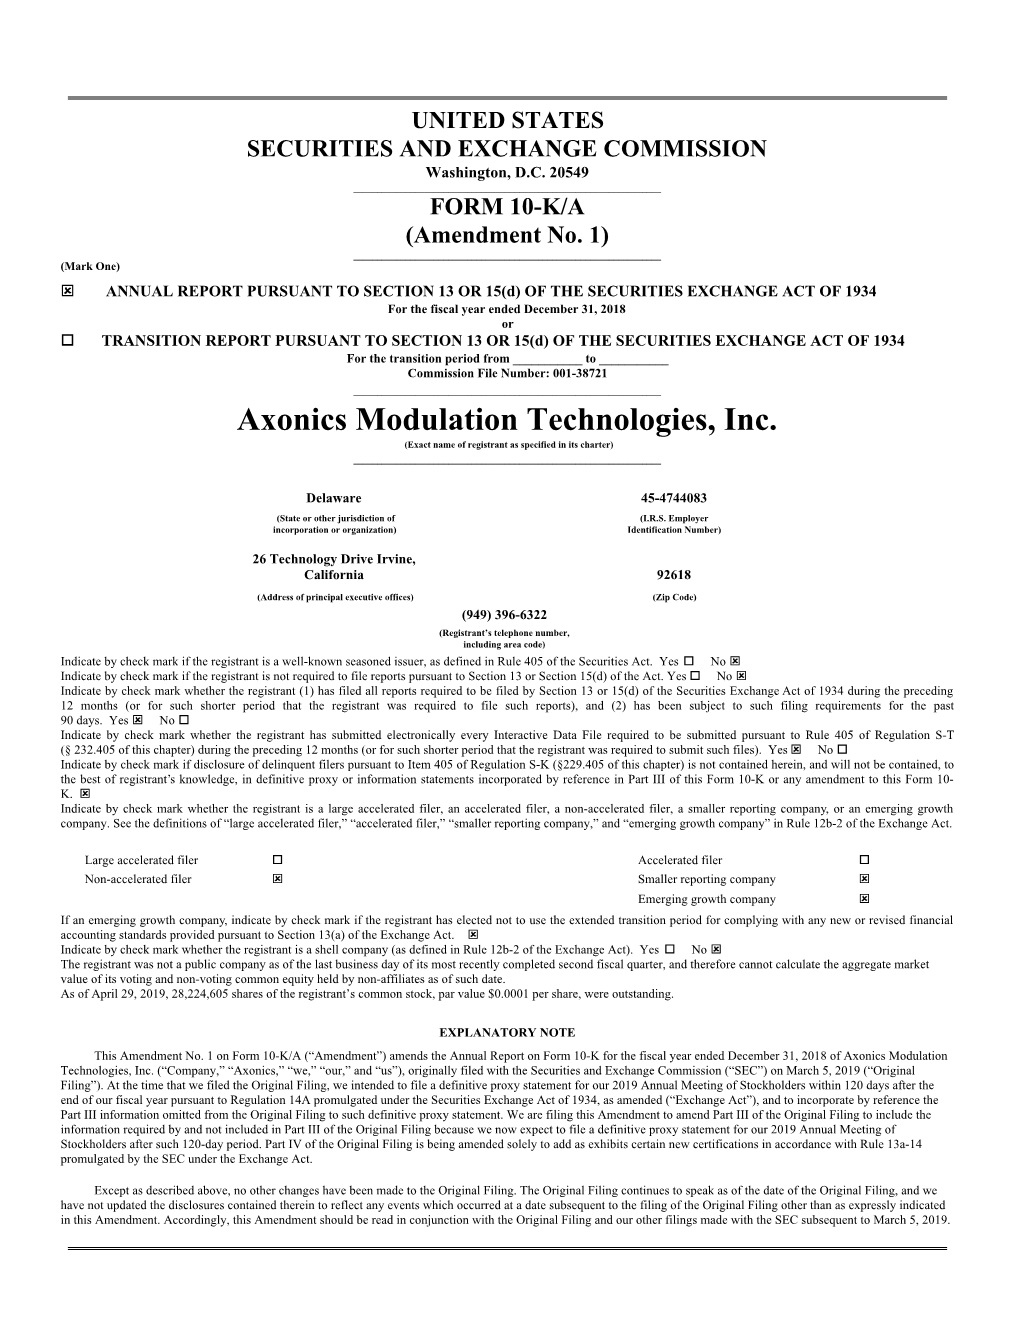 Axonics Modulation Technologies, Inc. (Exact Name of Registrant As Specified in Its Charter) ______